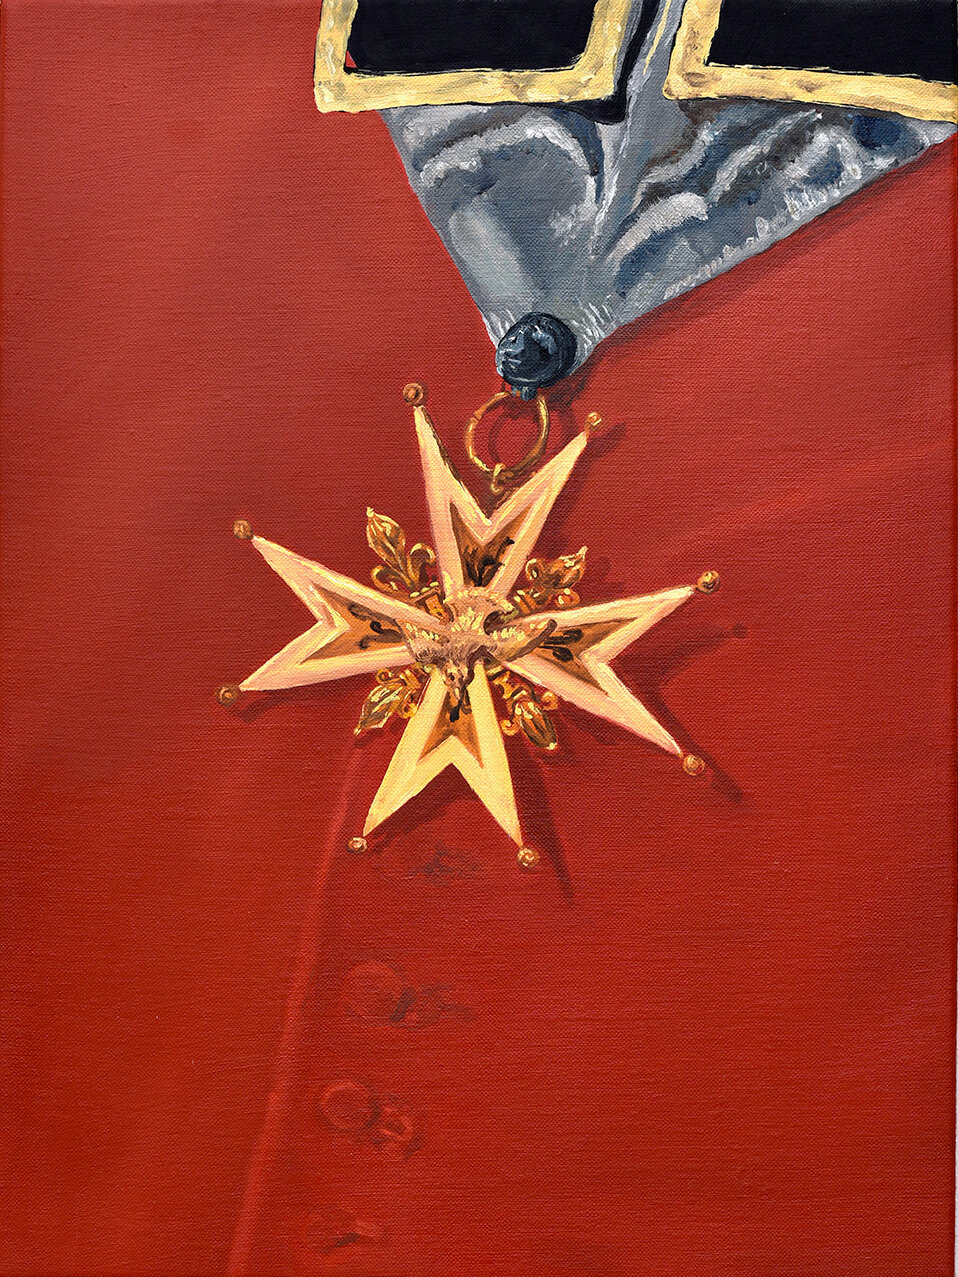 COAT OF ARMS 2, 16 x 12 inches / 40.6 x 30.4 cm, oil on linen, 2020